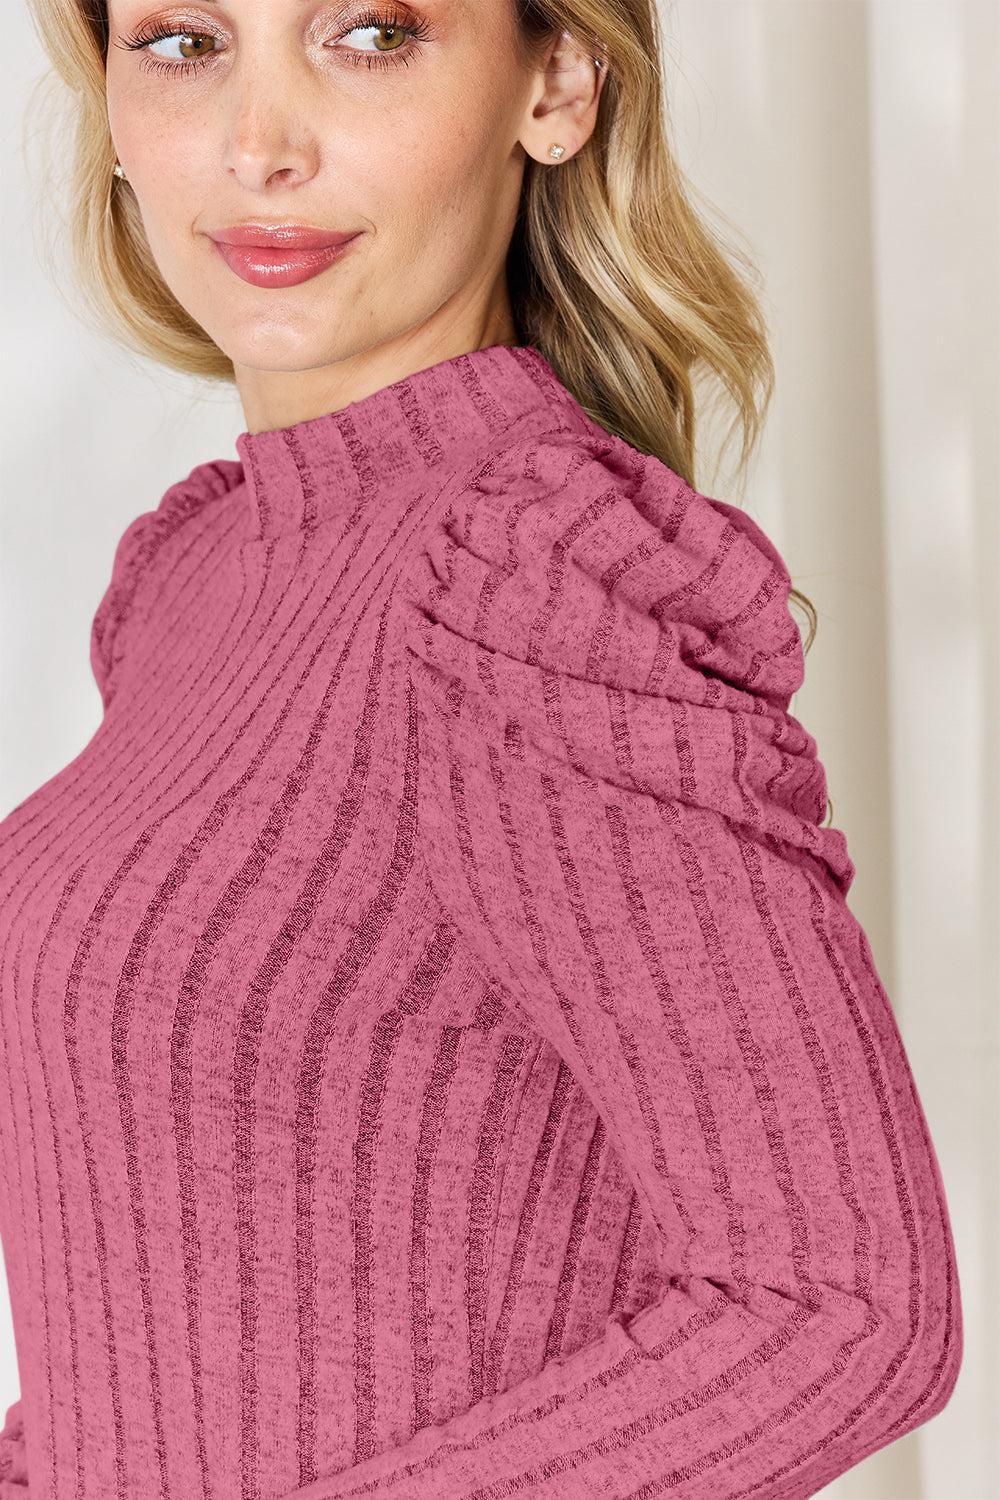 a woman with blonde hair wearing a pink sweater